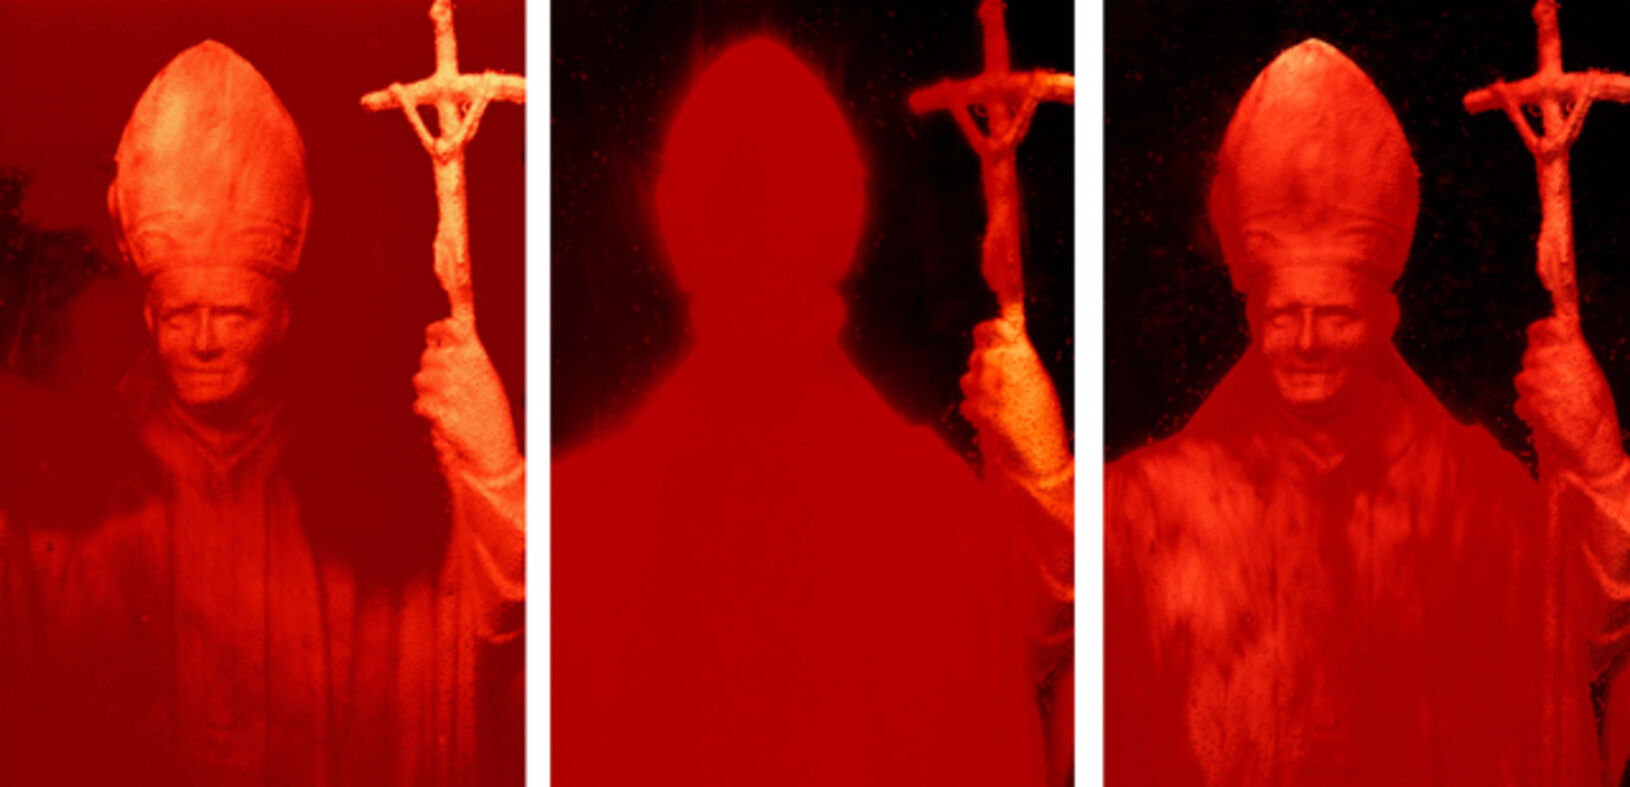 Andres Serrano | Red Pope, I, II and III (Immersions) (1990) | Available  for Sale | Artsy